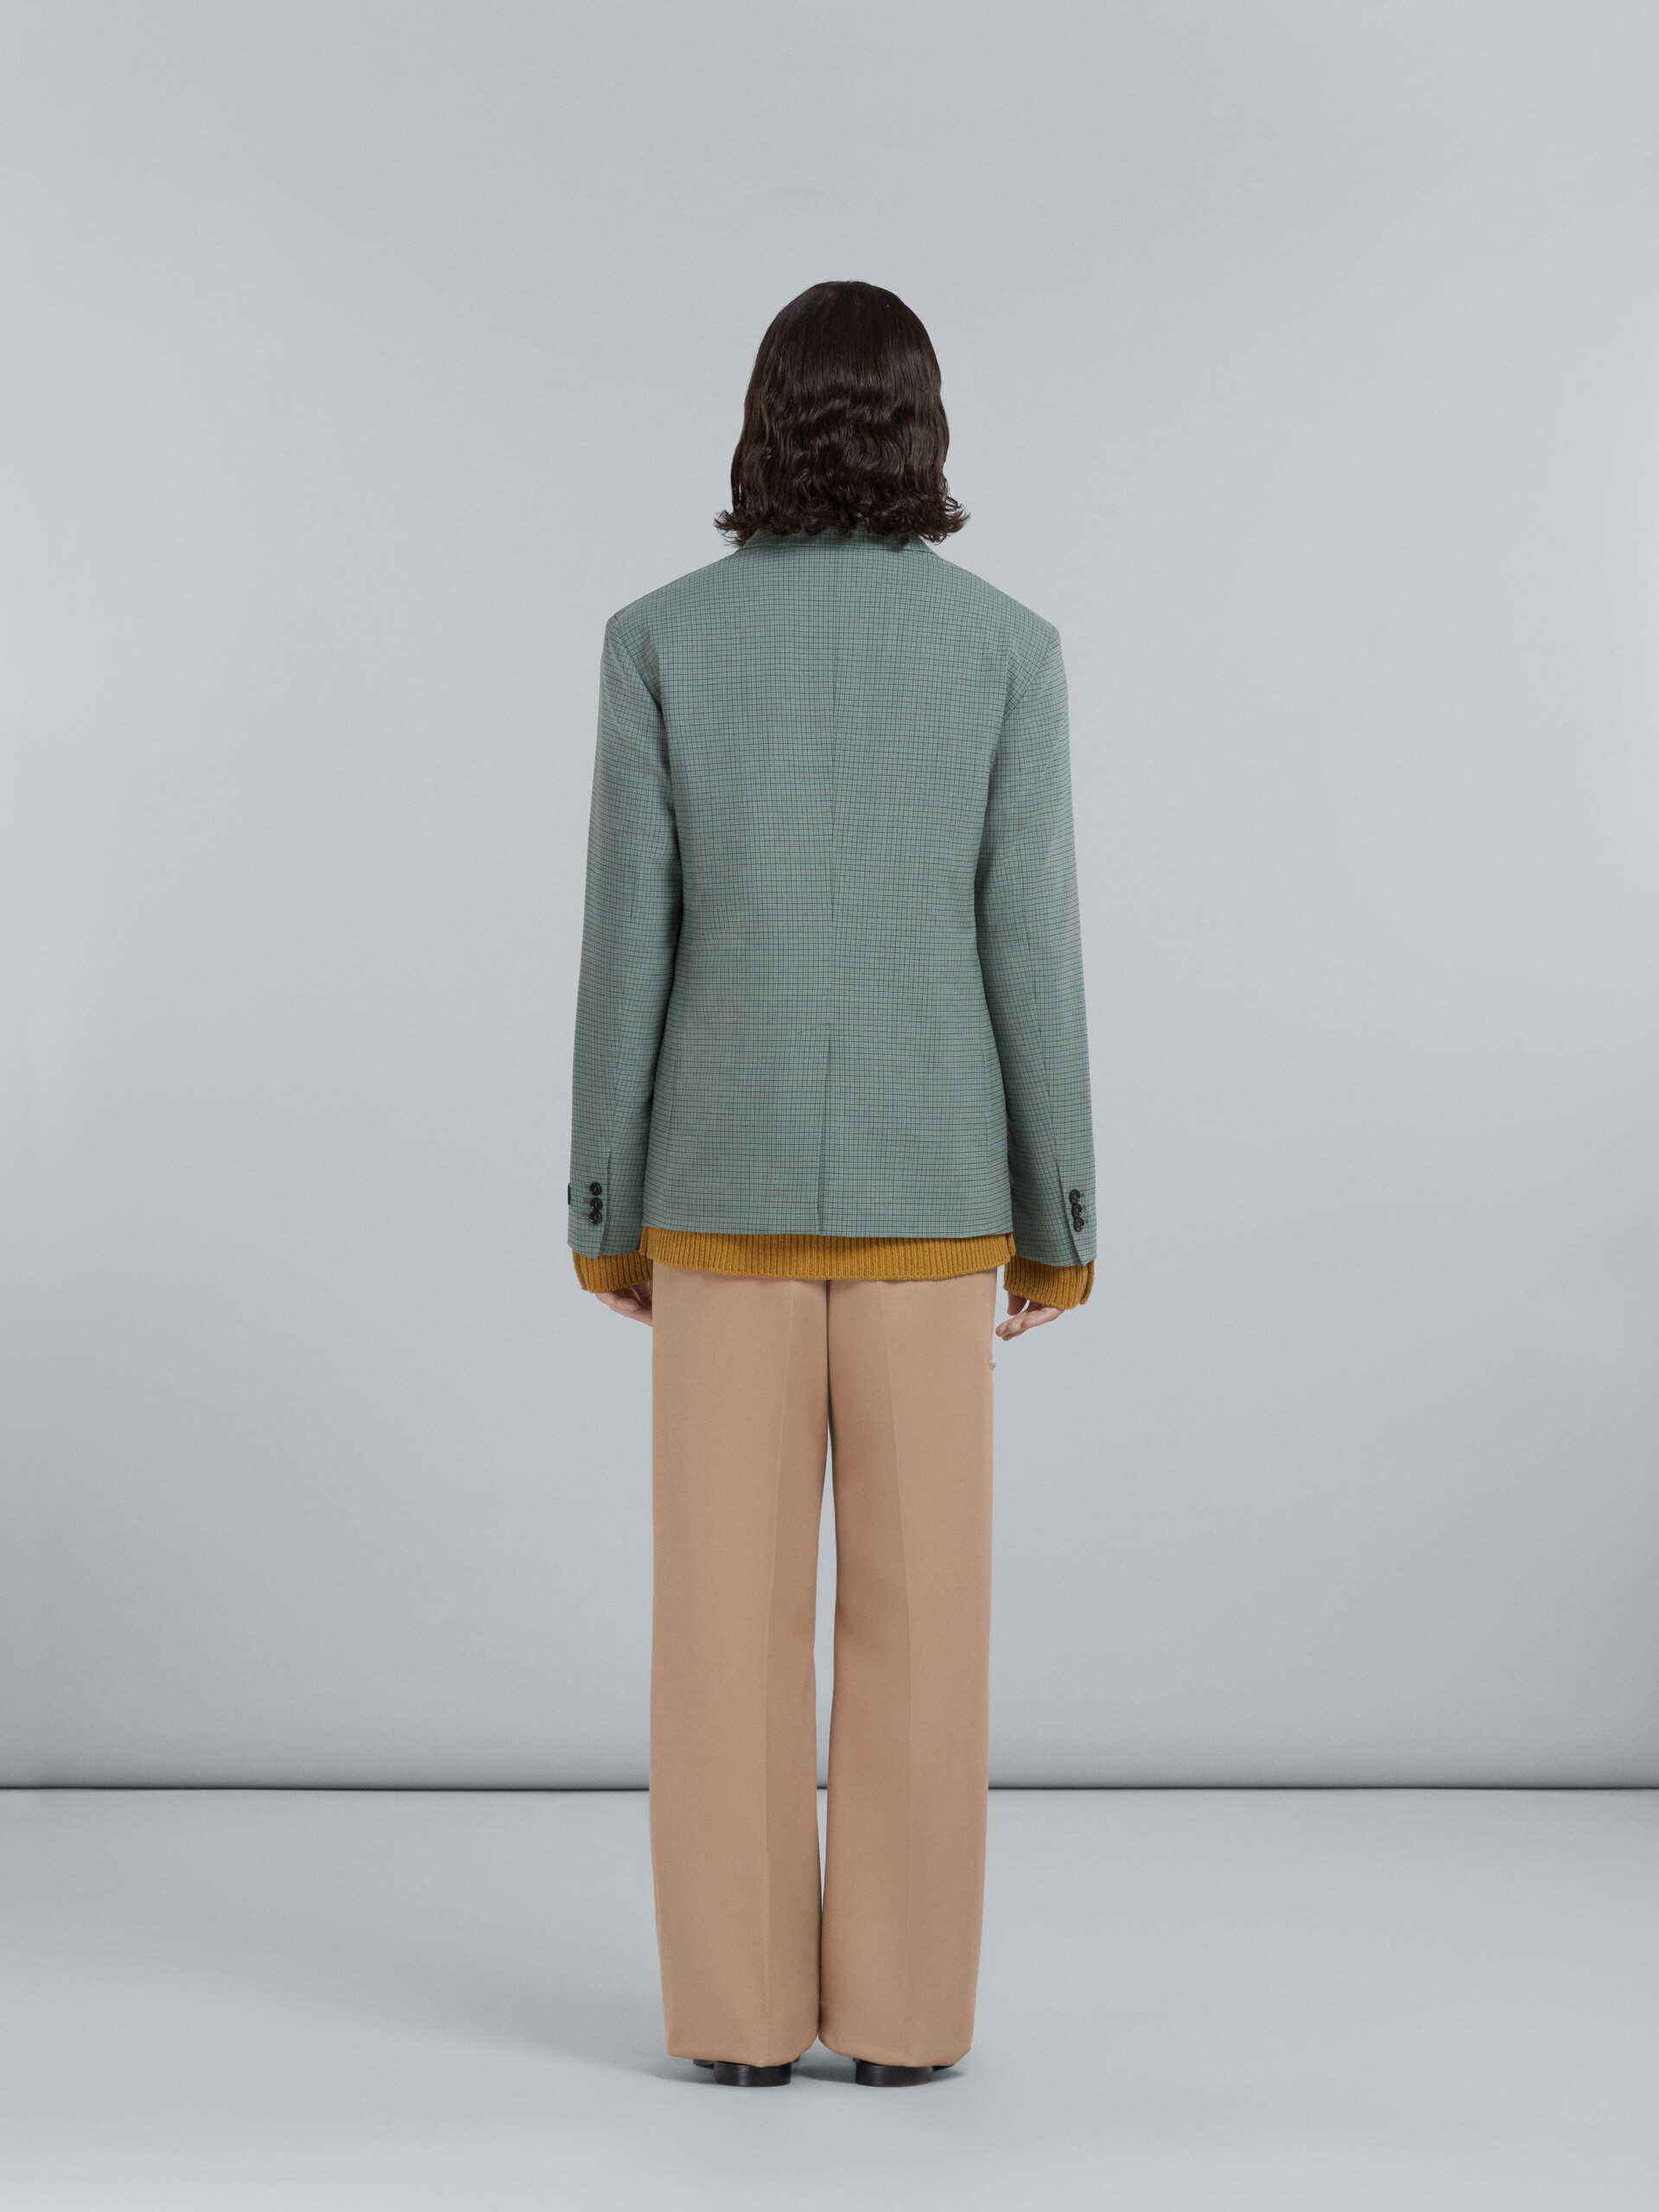 Blazer in tropical wool with green checks - Jackets - Image 3